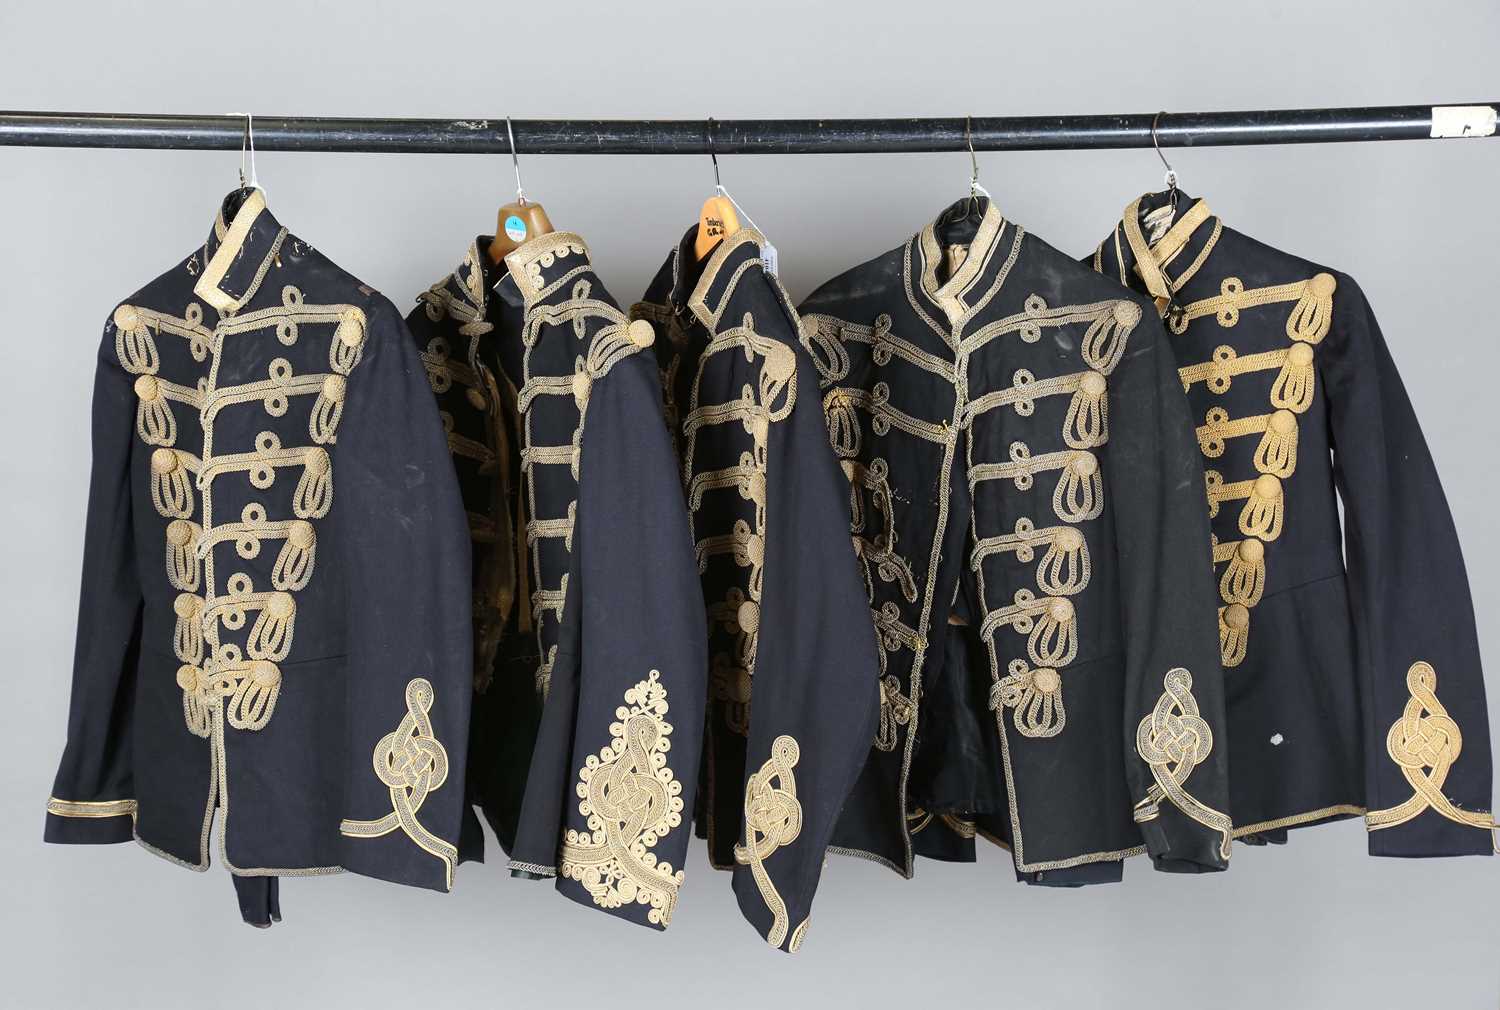 A group of early 20th century officer's dress tunics with bullion-embroidered decoration and rank - Image 14 of 23